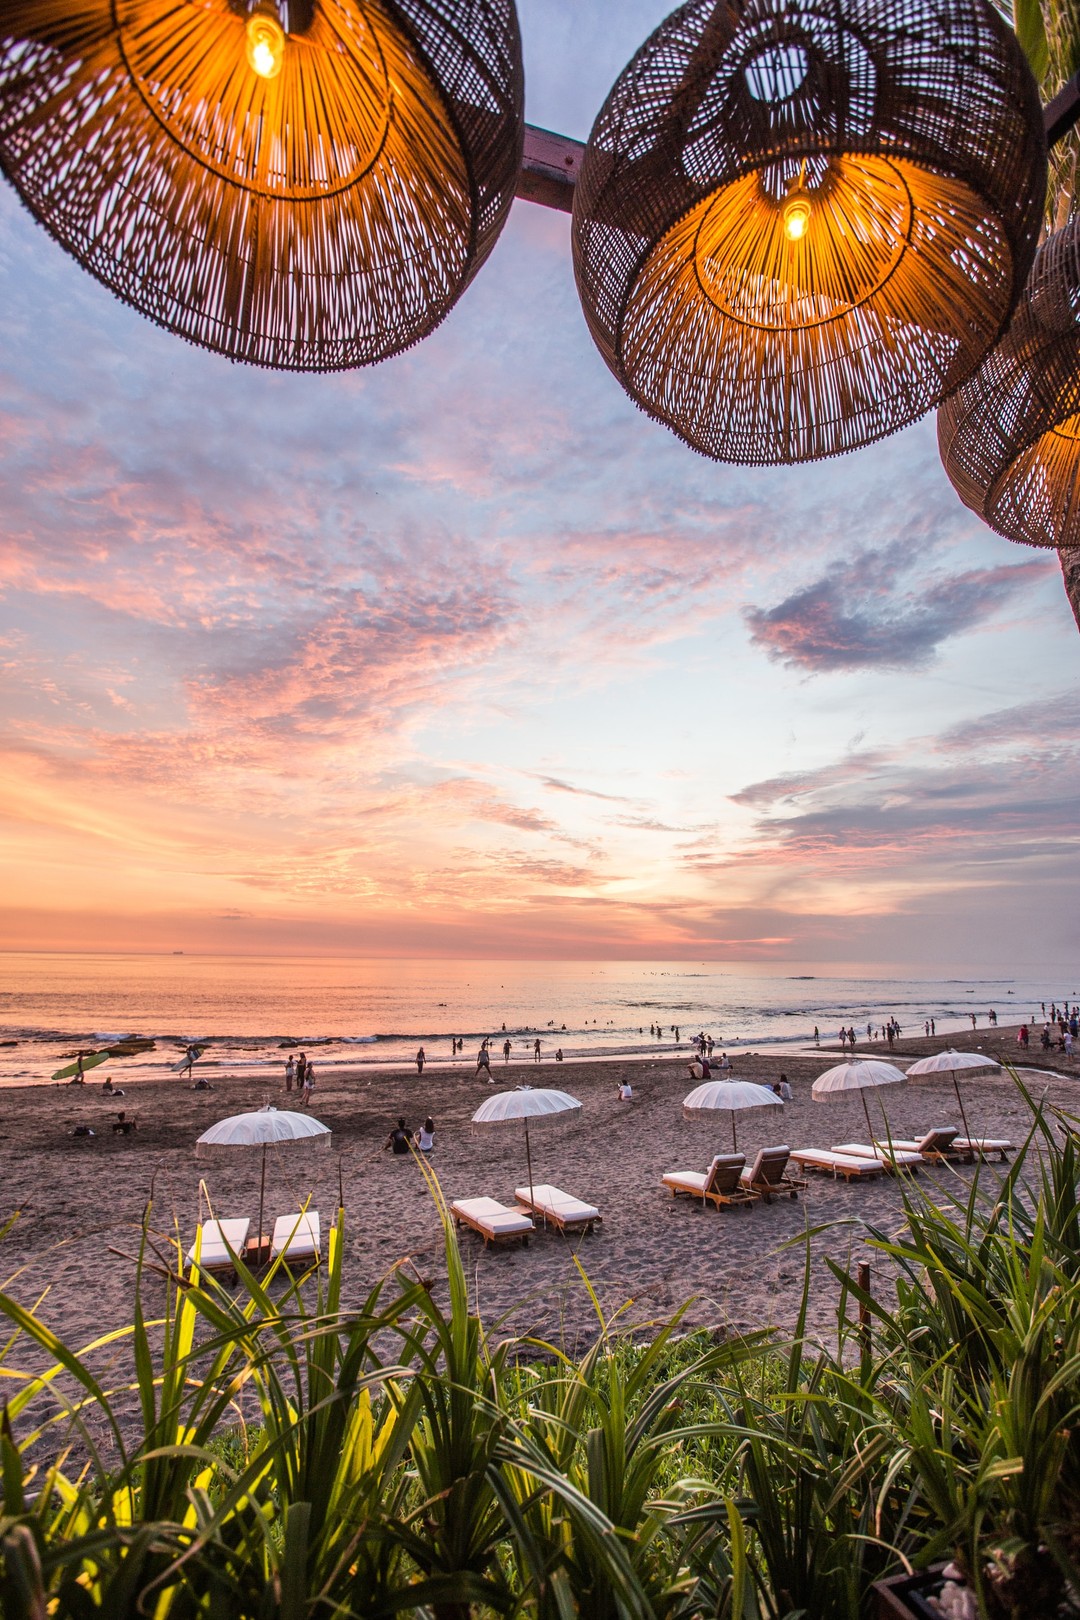 Bali, Indonesia: One of the best romantic getaways for couples who love nature.